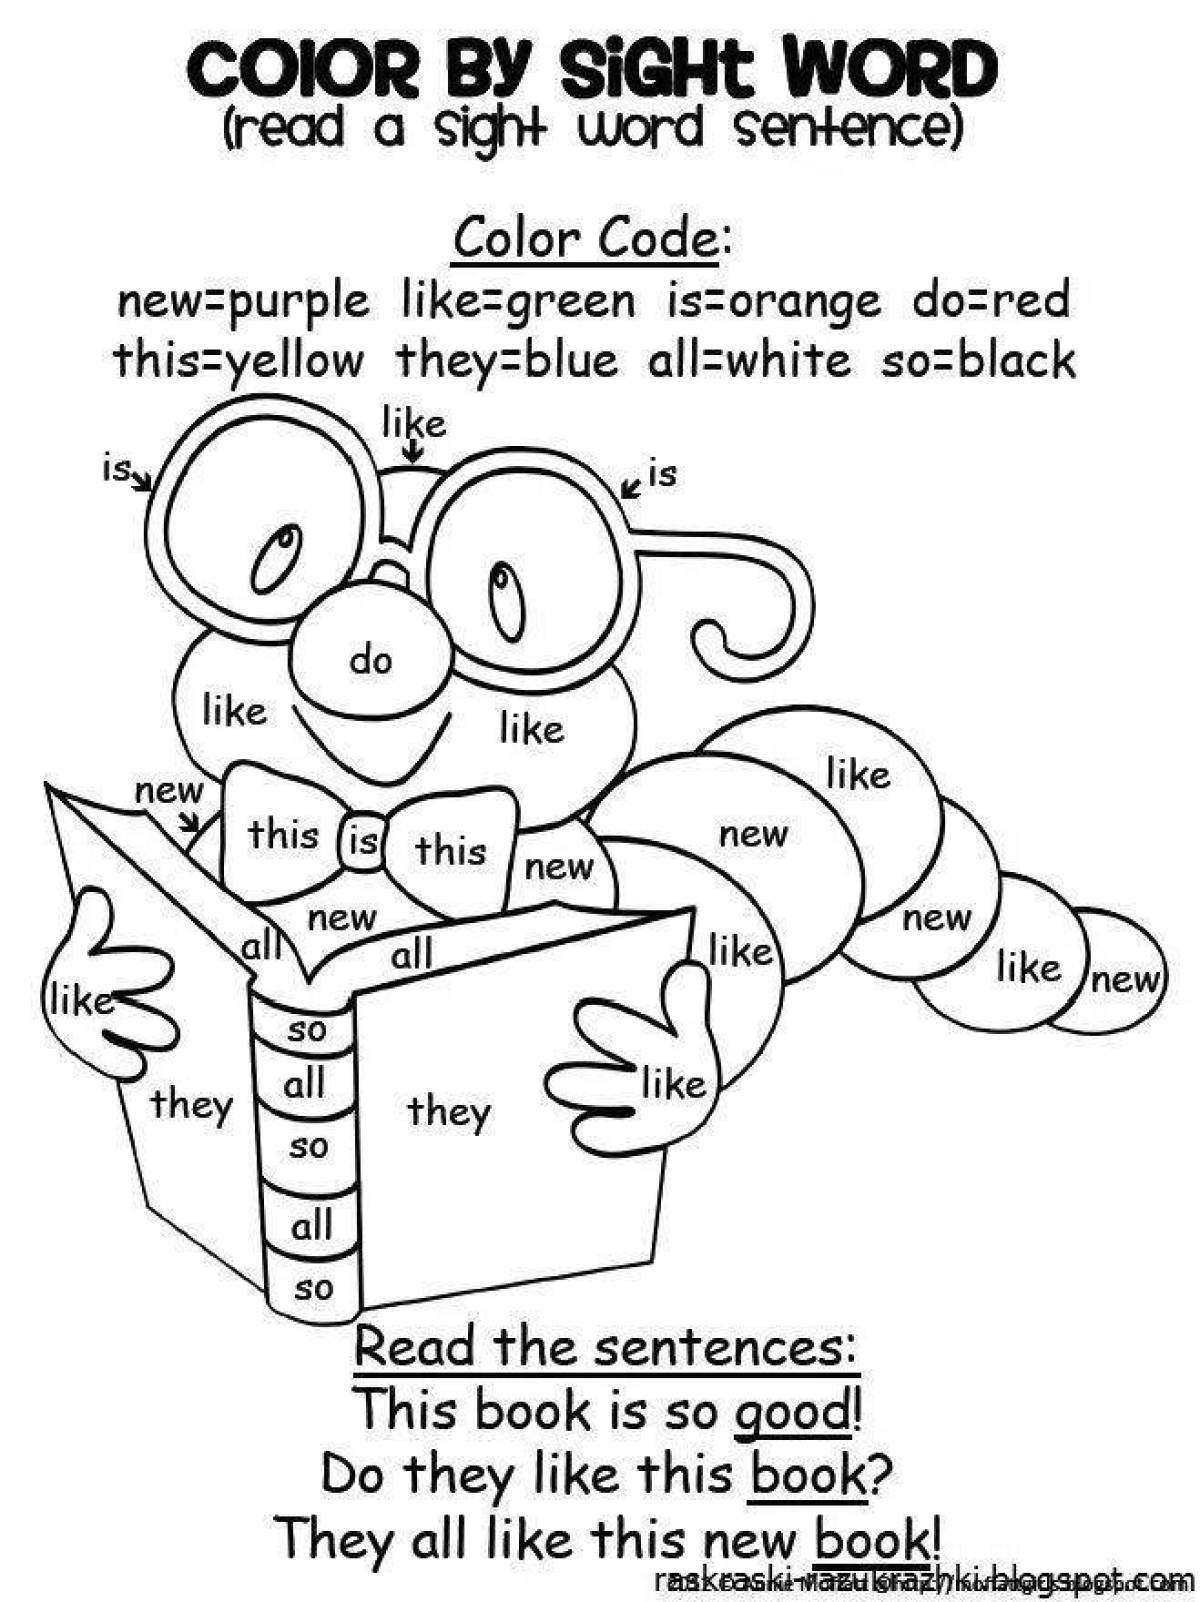 Alluring coloring page english translation